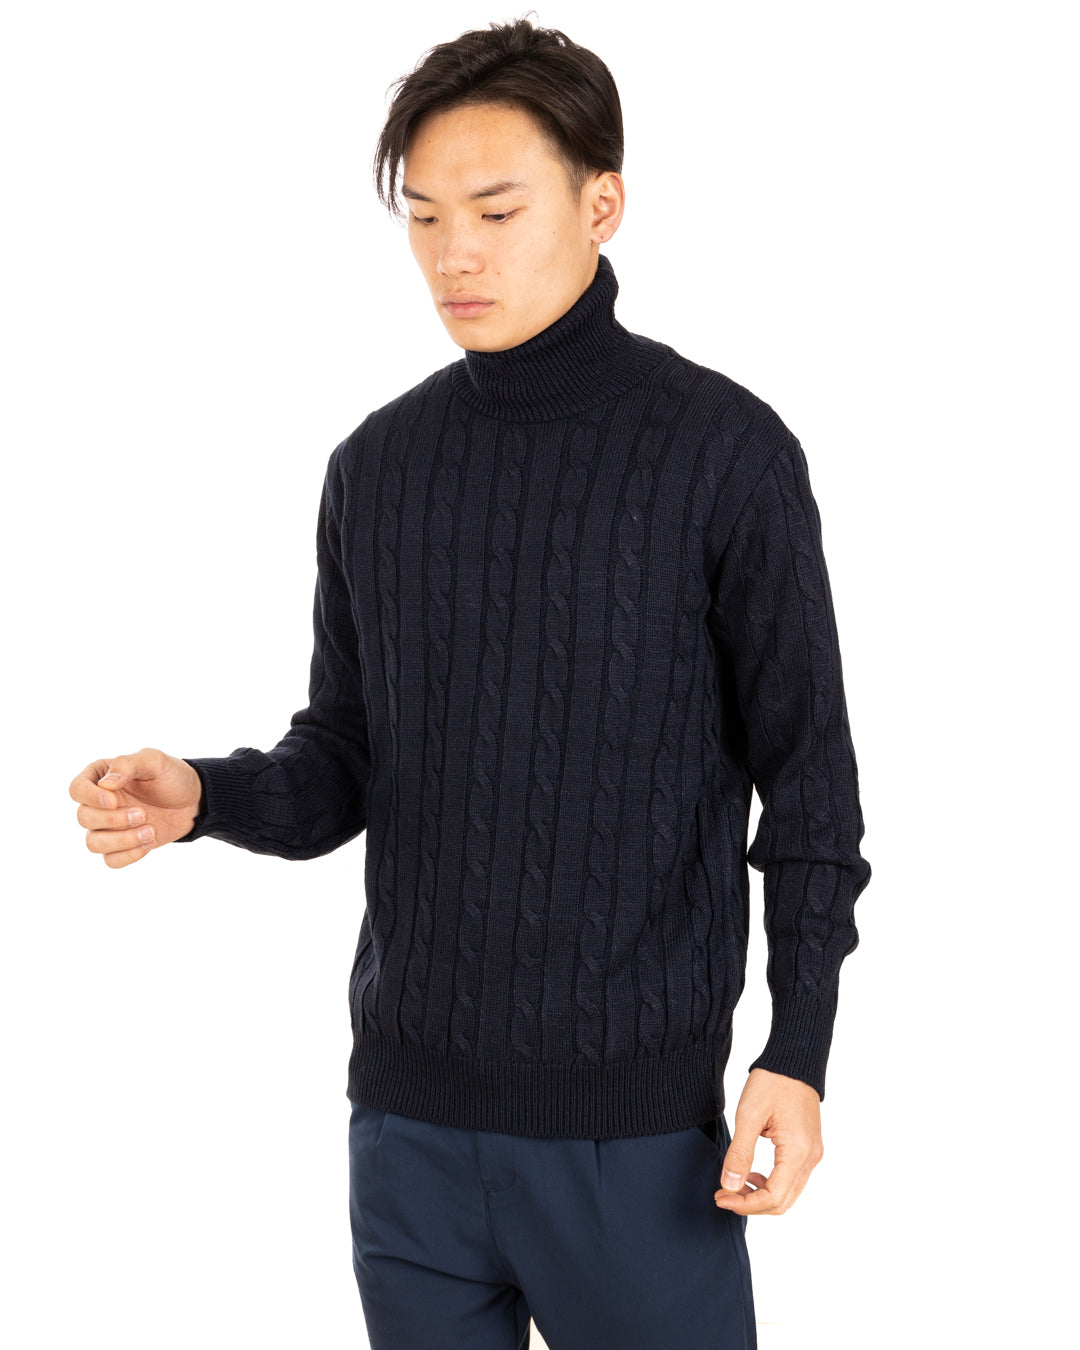 Crovie - blue sweater with high neck cables